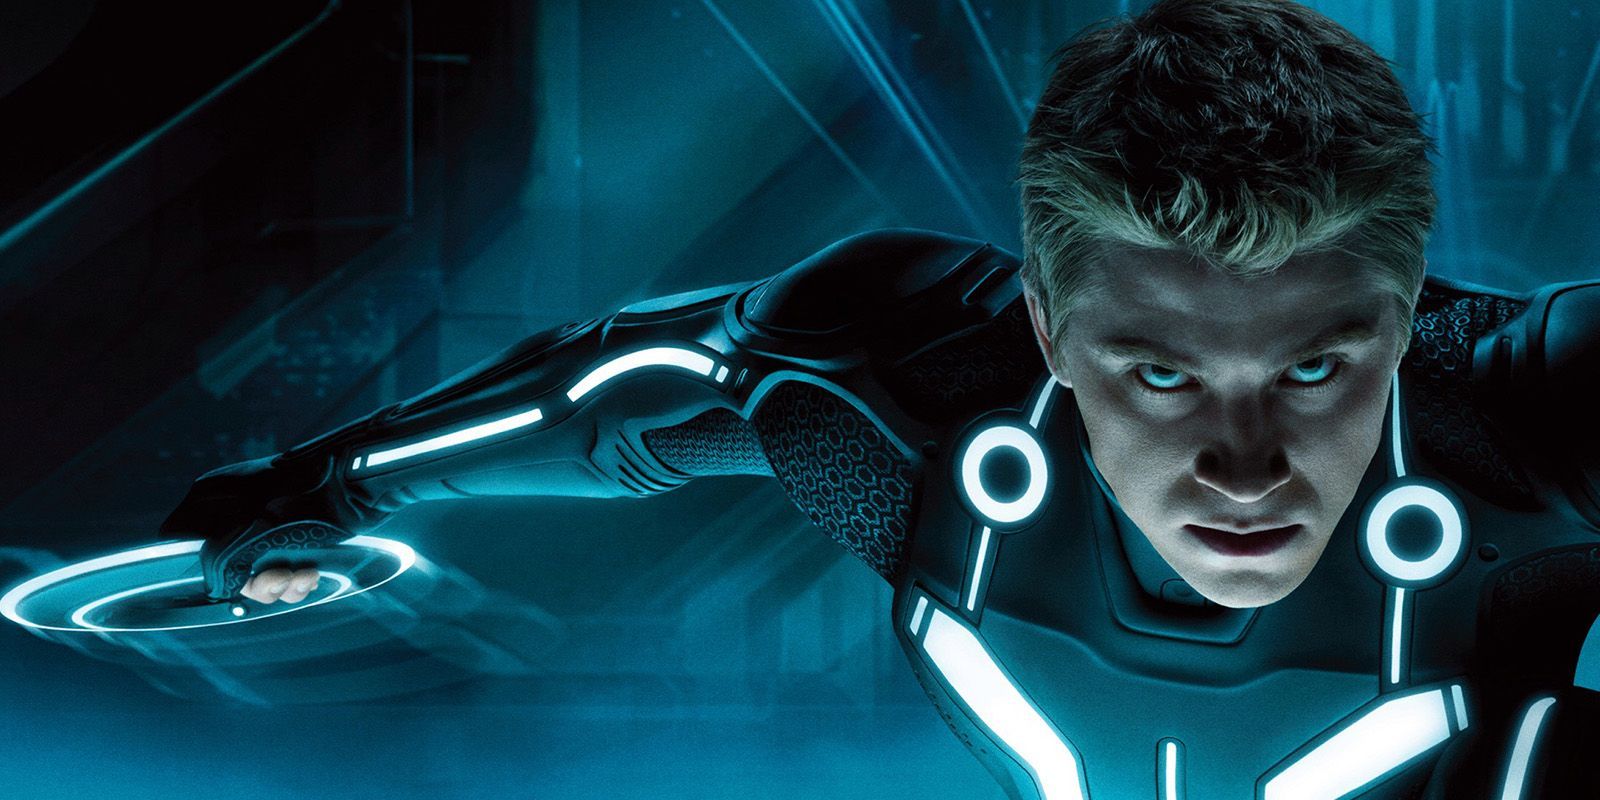 TRON 3 Script Was 'Going To Blow Legacy Out of Water'. Tron legacy, Tron, Movie wallpaper